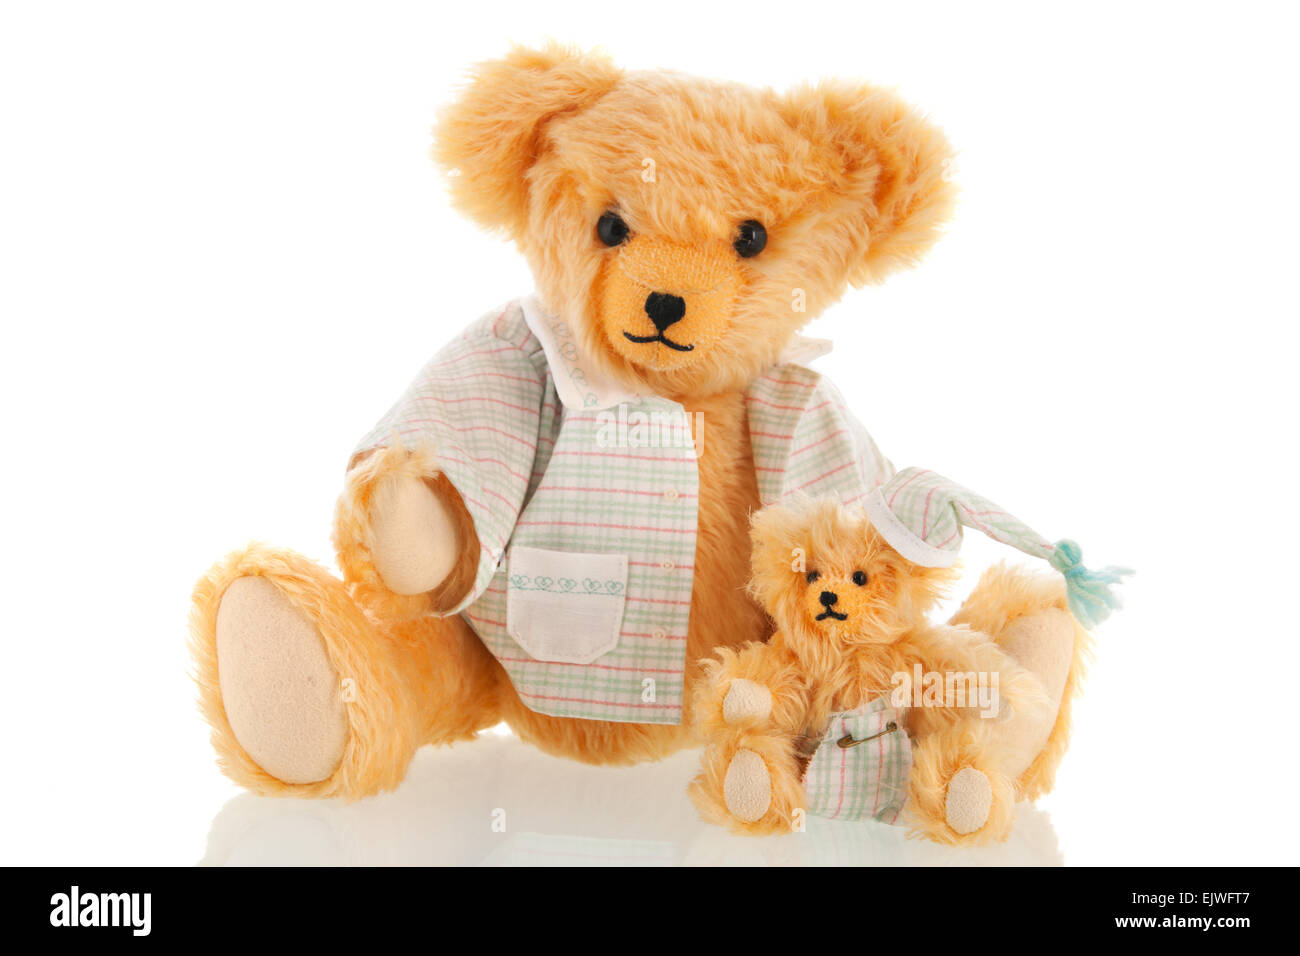 Stuffed bear in pajamas isolated over white background Stock Photo